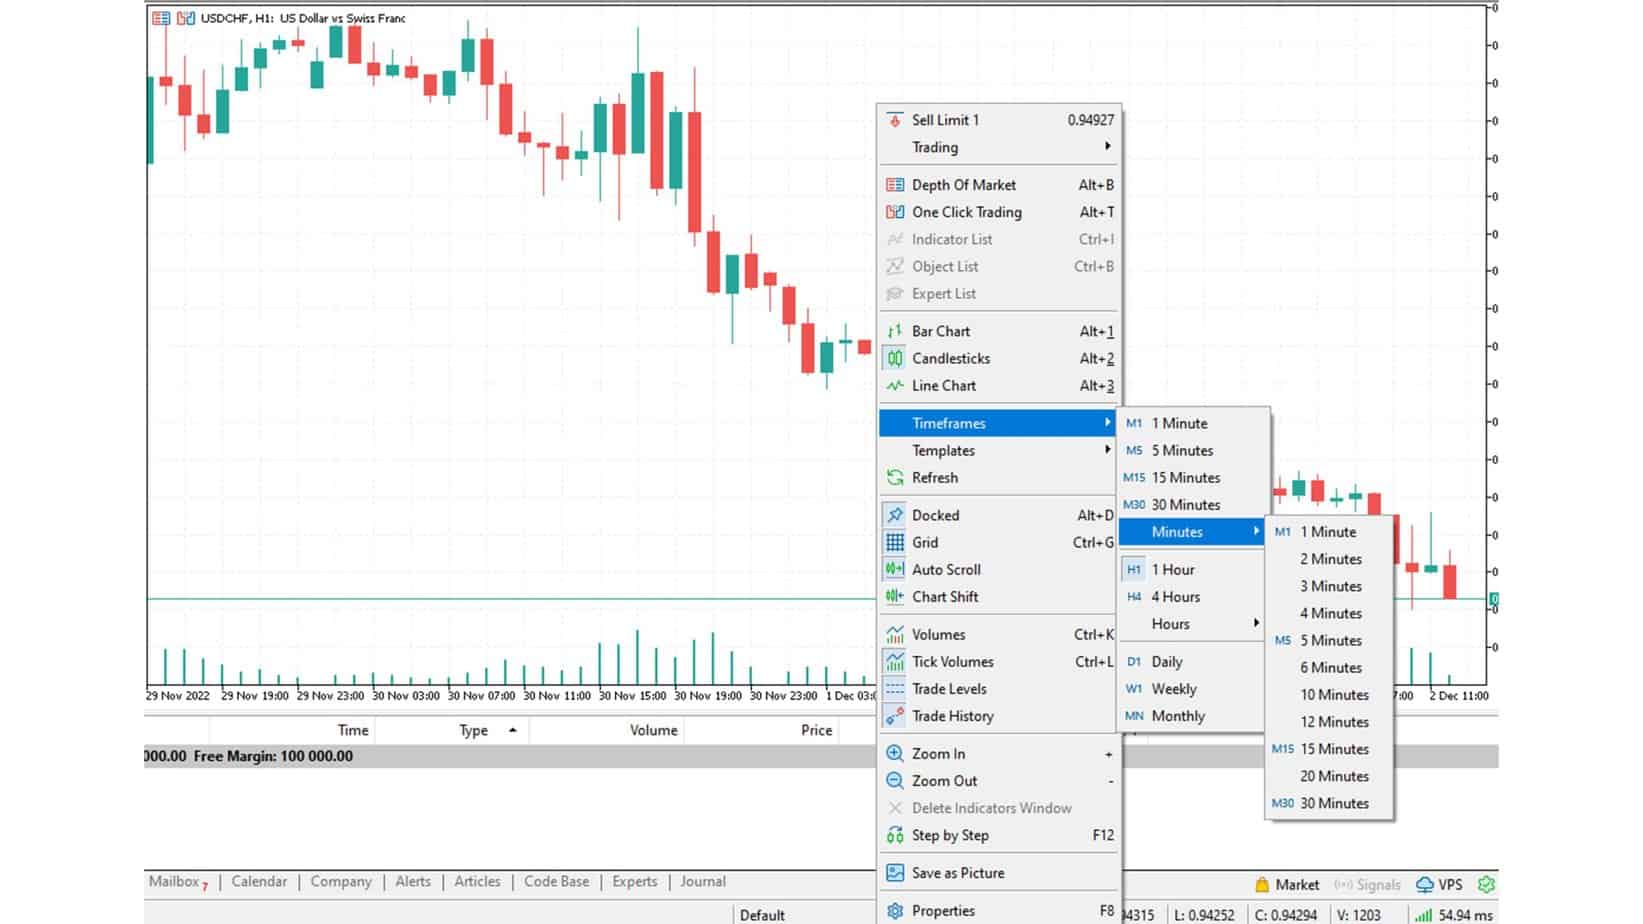 How to Change TimeFrames on MetaTrader from the chart